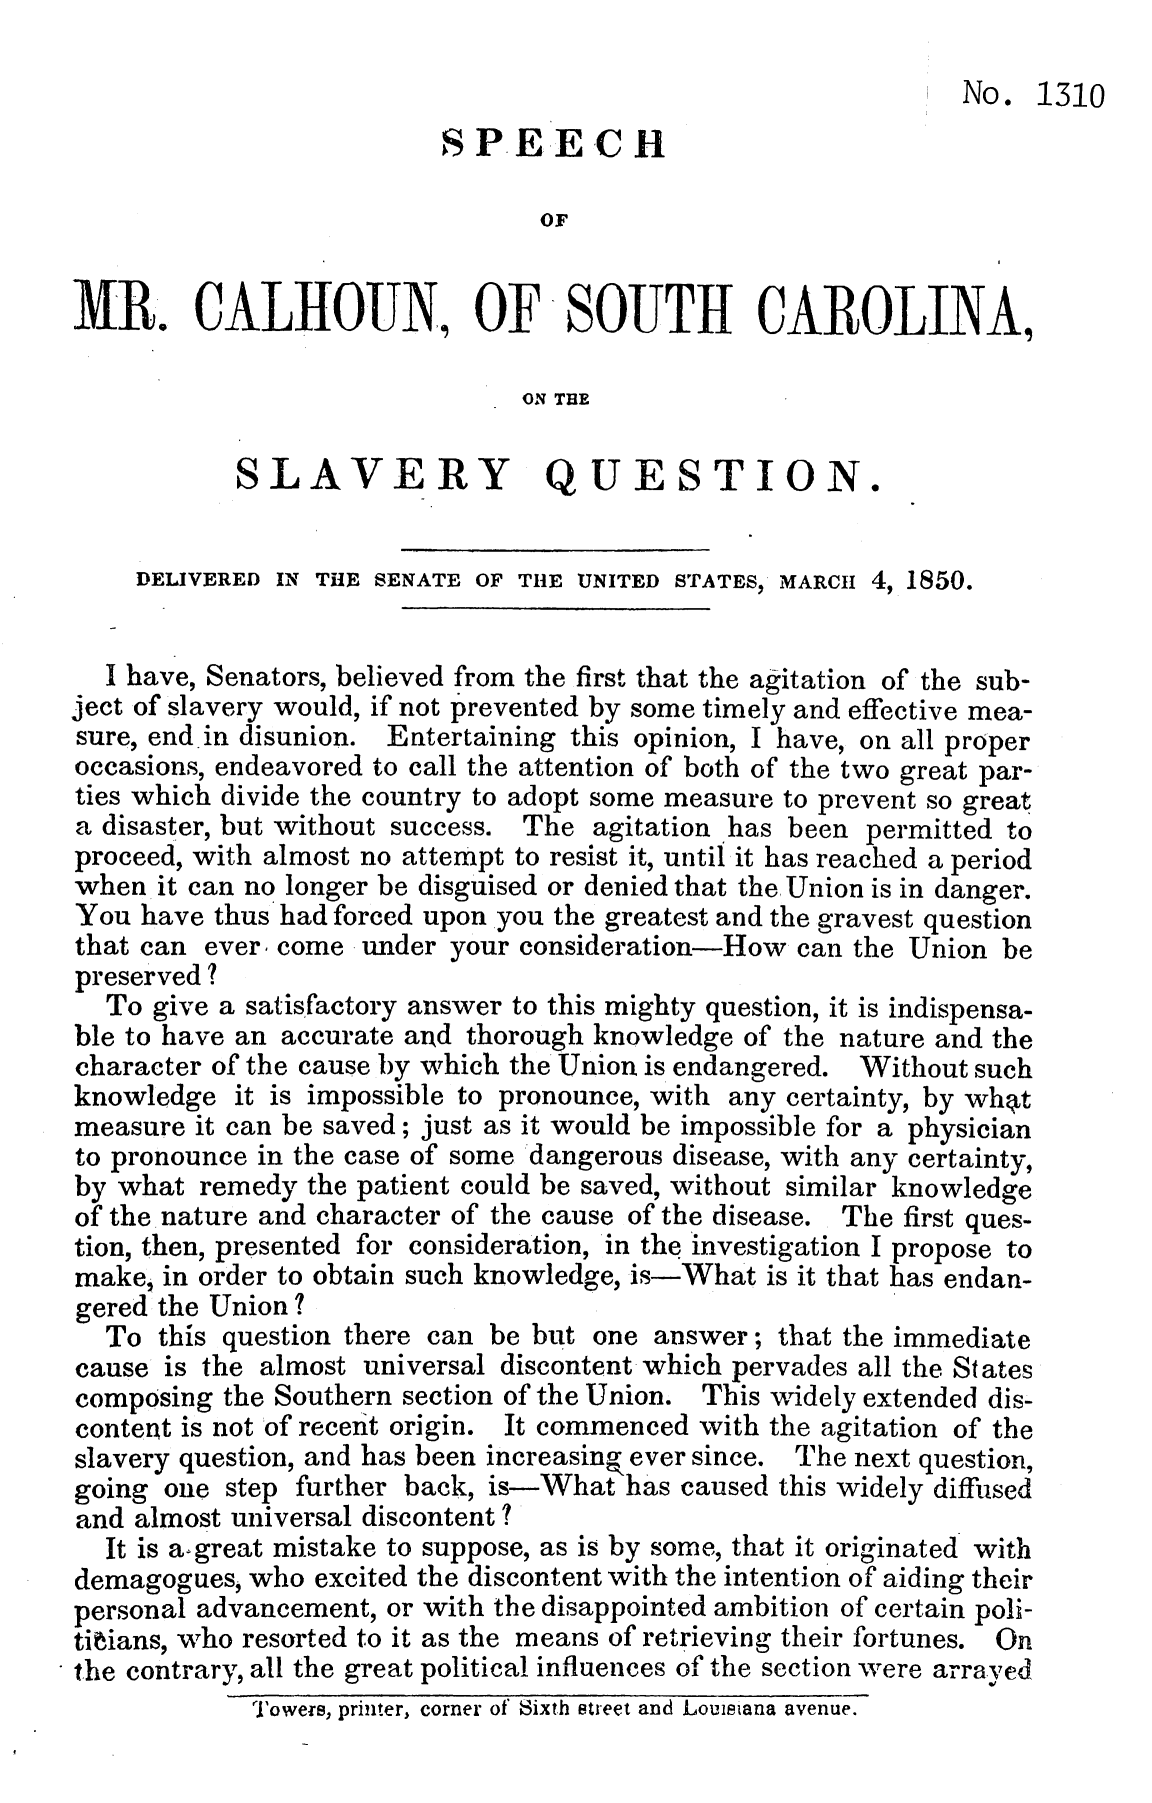 handle is hein.slavery/spmrrcsc0001 and id is 1 raw text is: 

                                                               No. 1310
                          SPEECH

                                 OF


MR. CALHOUN, OF SOUTH CAROLINA,

                                ON THE

            SLAVERY QUESTION.


     DELIVERED IN THE SENATE OF THE UNITED STATES, MARCII 4, 1850.


   I have, Senators, believed from the first that the agitation of the sub-
ject of slavery would, if not prevented by some timely and effective mea-
sure, end in disunion. Entertaining this opinion, I have, on all proper
occasions, endeavored to call the attention of both of the two great par-
ties which divide the country to adopt some measure to prevent so great
a disaster, but without success. The agitation has been permitted to
proceed, with almost no attempt to resist it, until it has reached a period
when it can no longer be disguised or denied that the Union is in danger.
You have thus had forced upon you the greatest and the gravest question
that can ever, come under your consideration-How can the Union be
preserved ?
   To give a satisfactory answer to this mighty question, it is indispensa-
 ble to have an accurate and thorough knowledge of the nature and the
 character of the cause by which the Union is endangered. Without such
 knowledge it is impossible to pronounce, with any certainty, by whpt
 measure it can be saved; just as it would be impossible for a physician
 to pronounce in the case of some dangerous disease, with any certainty,
 by what remedy the patient could be saved, without similar knowledge
 of the-nature and character of the cause of the disease. The first ques-
 tion, then, presented for consideration, in the investigation I propose to
 make, in order to obtain such knowledge, is-What is it that has endan-
 gered the Union?
   To this question there can be but one answer; that the immediate
 cause is the almost universal discontent which pervades all the States
 composing the Southern section of the Union. This widely extended dis-
 content is not of recent origin. It commenced with the agitation of the
 slavery question, and has been increasing, ever since. The next question,
 going one step further back, is-What has caused this widely diffused
 and almost universal discontent?
   It is a-great mistake to suppose, as is by some, that it originated with
 demagogues, who excited the discontent with the intention of aiding their
 personal advancement, or with the disappointed ambition of certain poli-
 tii~ians, who resorted to it as the means of retrieving their fortunes. On
the contrary, all the great political influences of the section were arrayed
             Towers, printer, corner of' Sixth street and Louisiana avenue.


